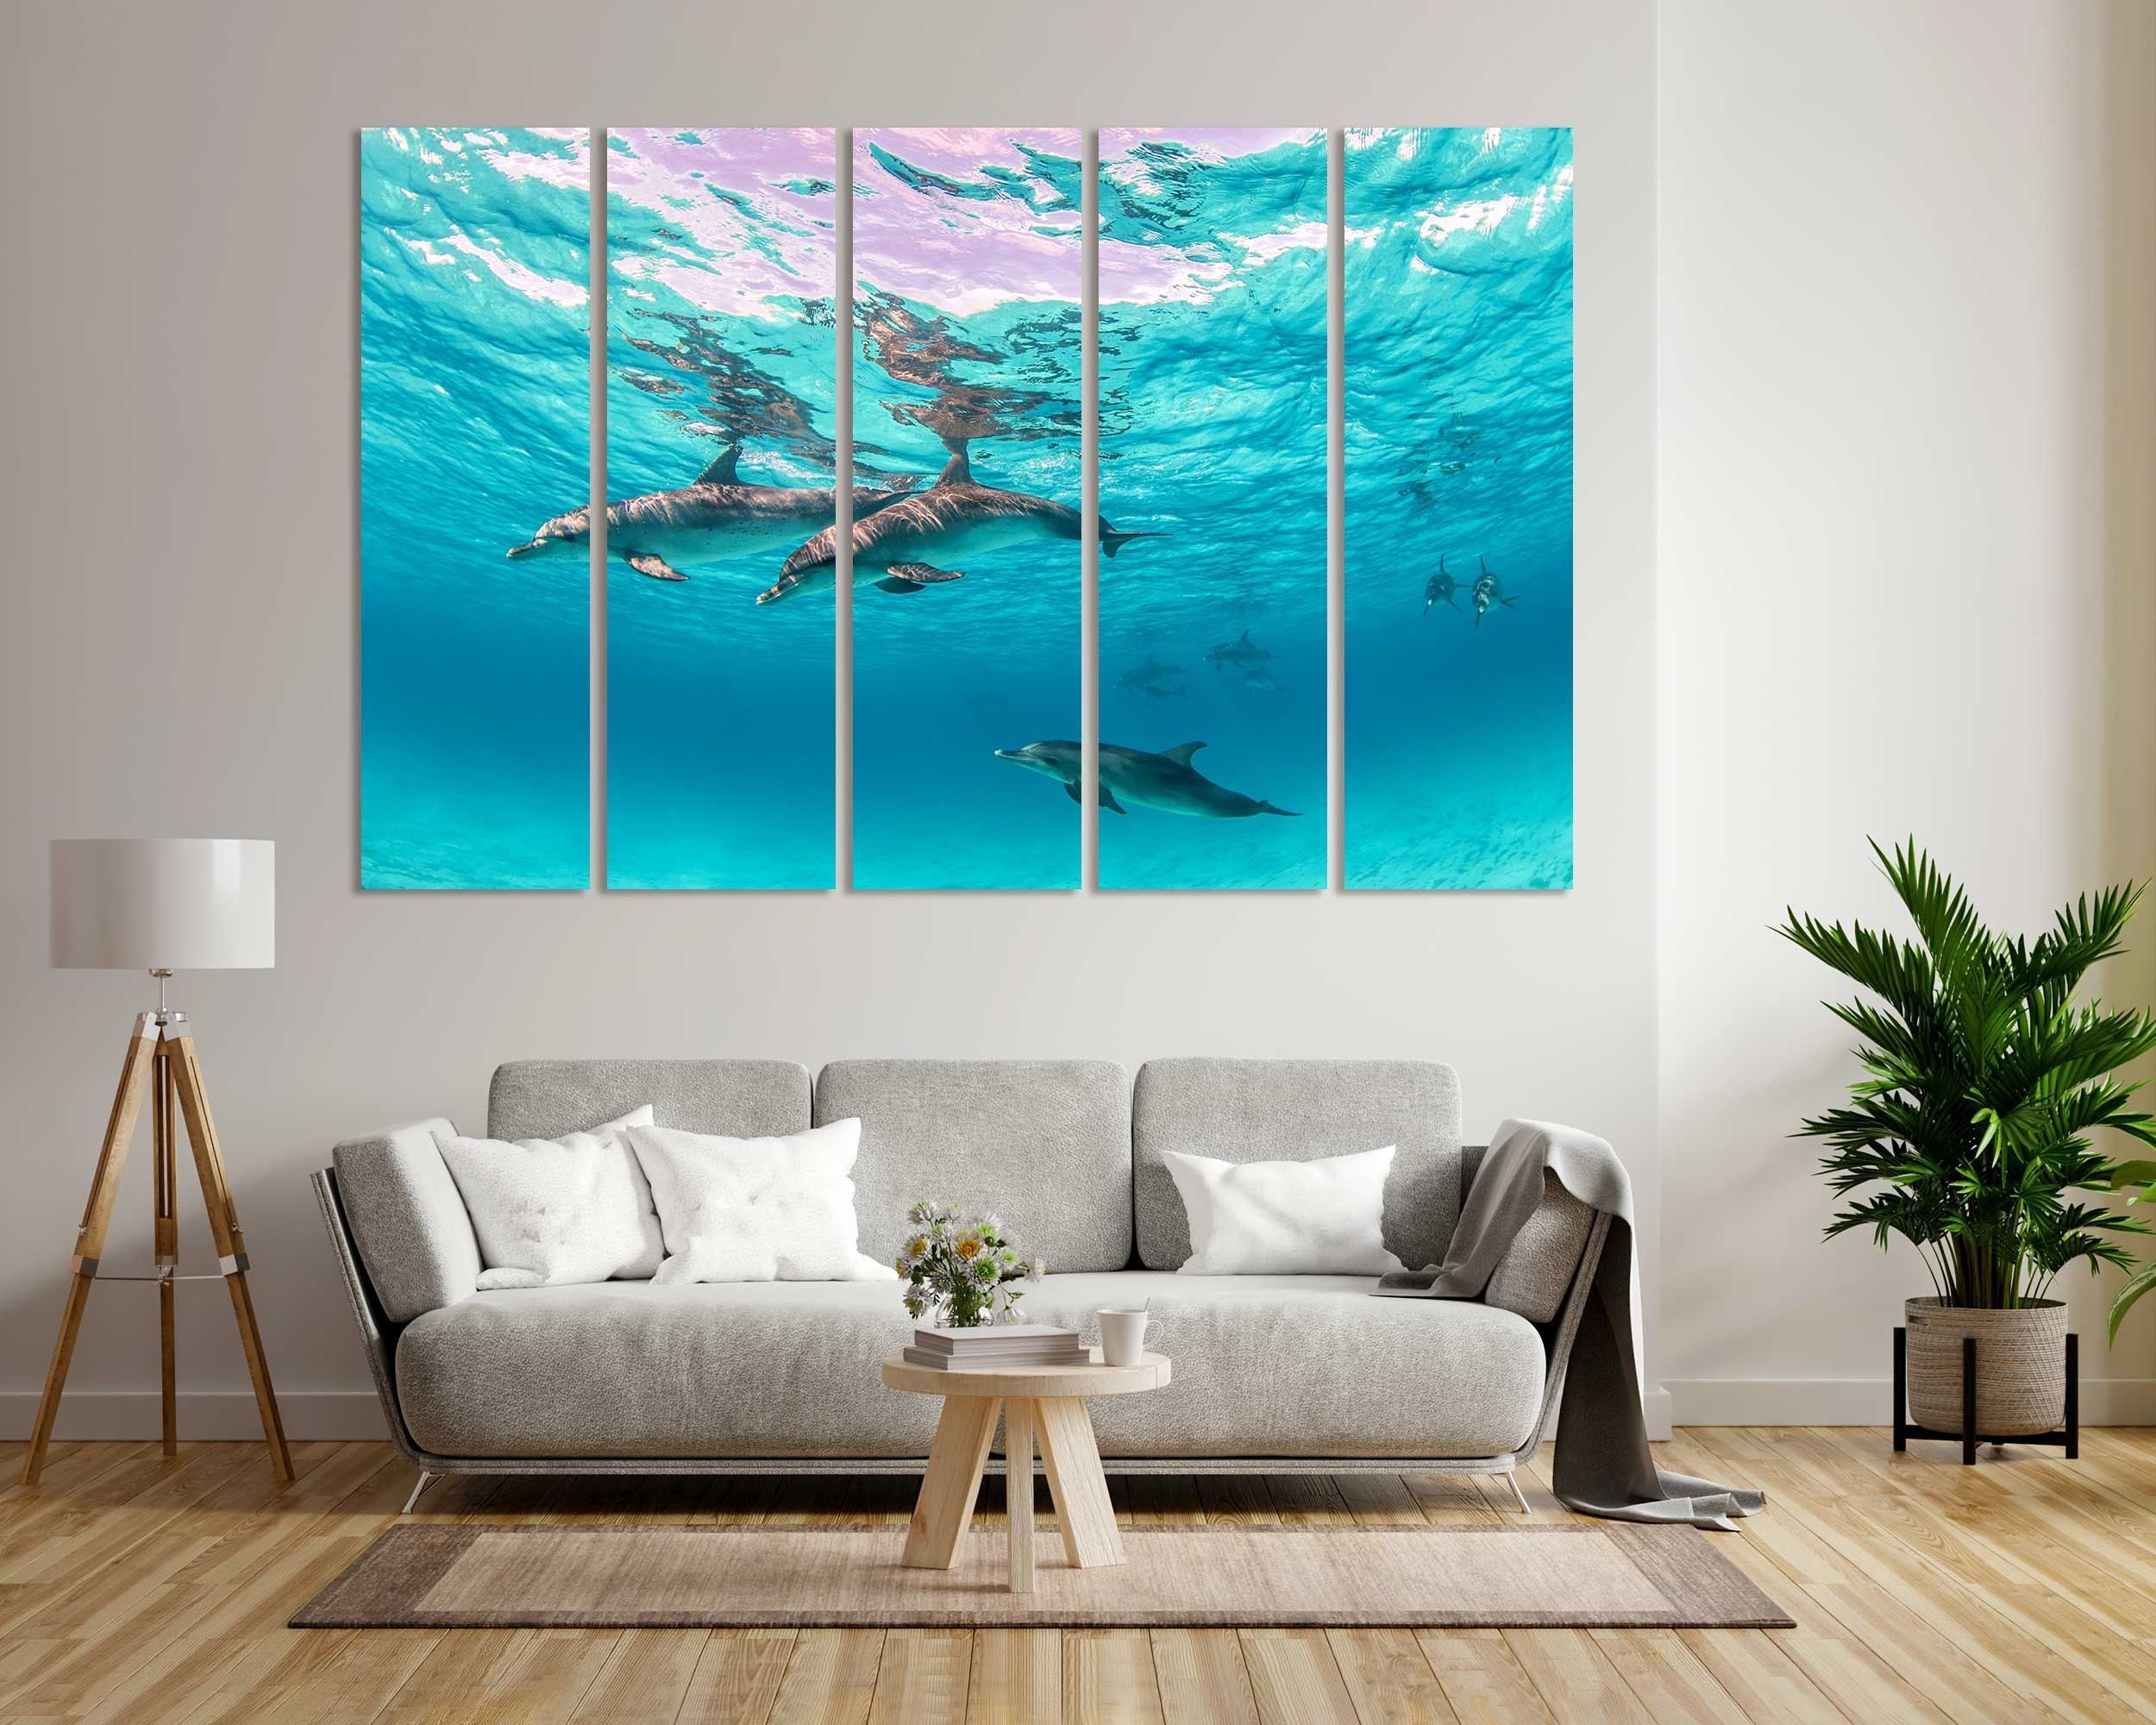 Cute Dolphins Underwater Original Art For Interior Decor Sea – Etsy With Underwater Wood Wall Art (View 14 of 15)